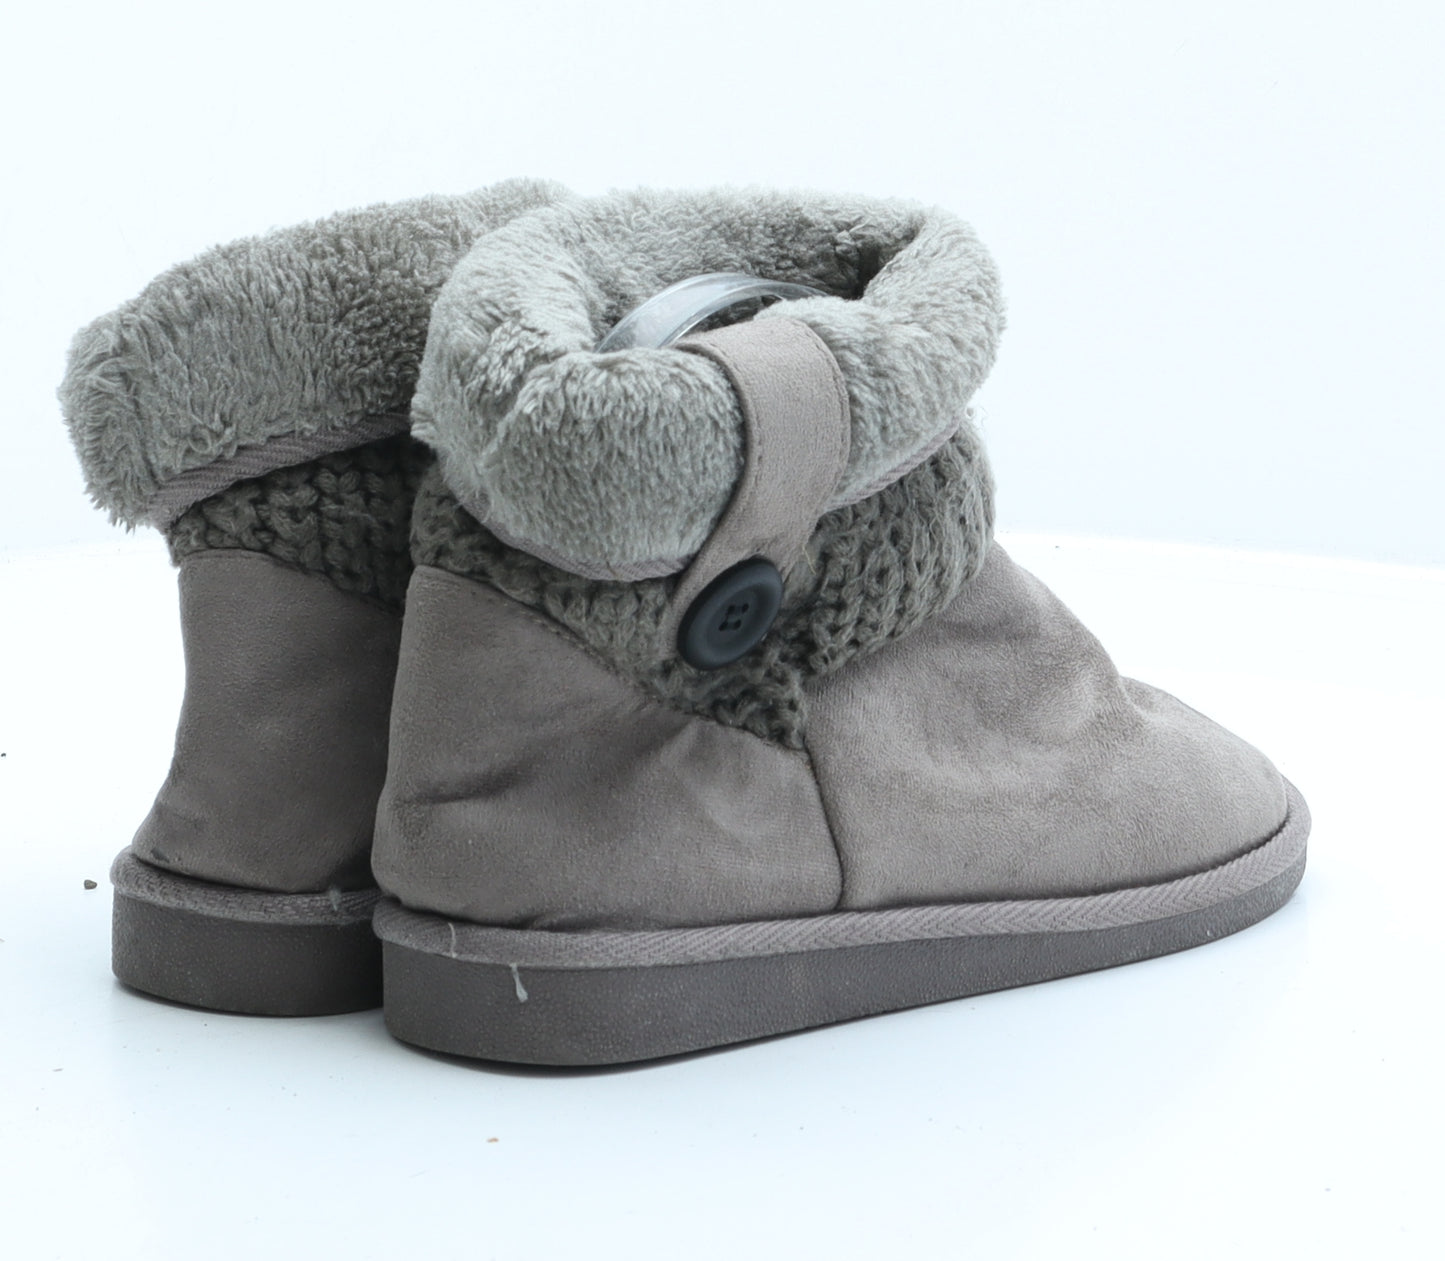 Preworn Womens Grey Synthetic Shearling Style Boot UK 3 36